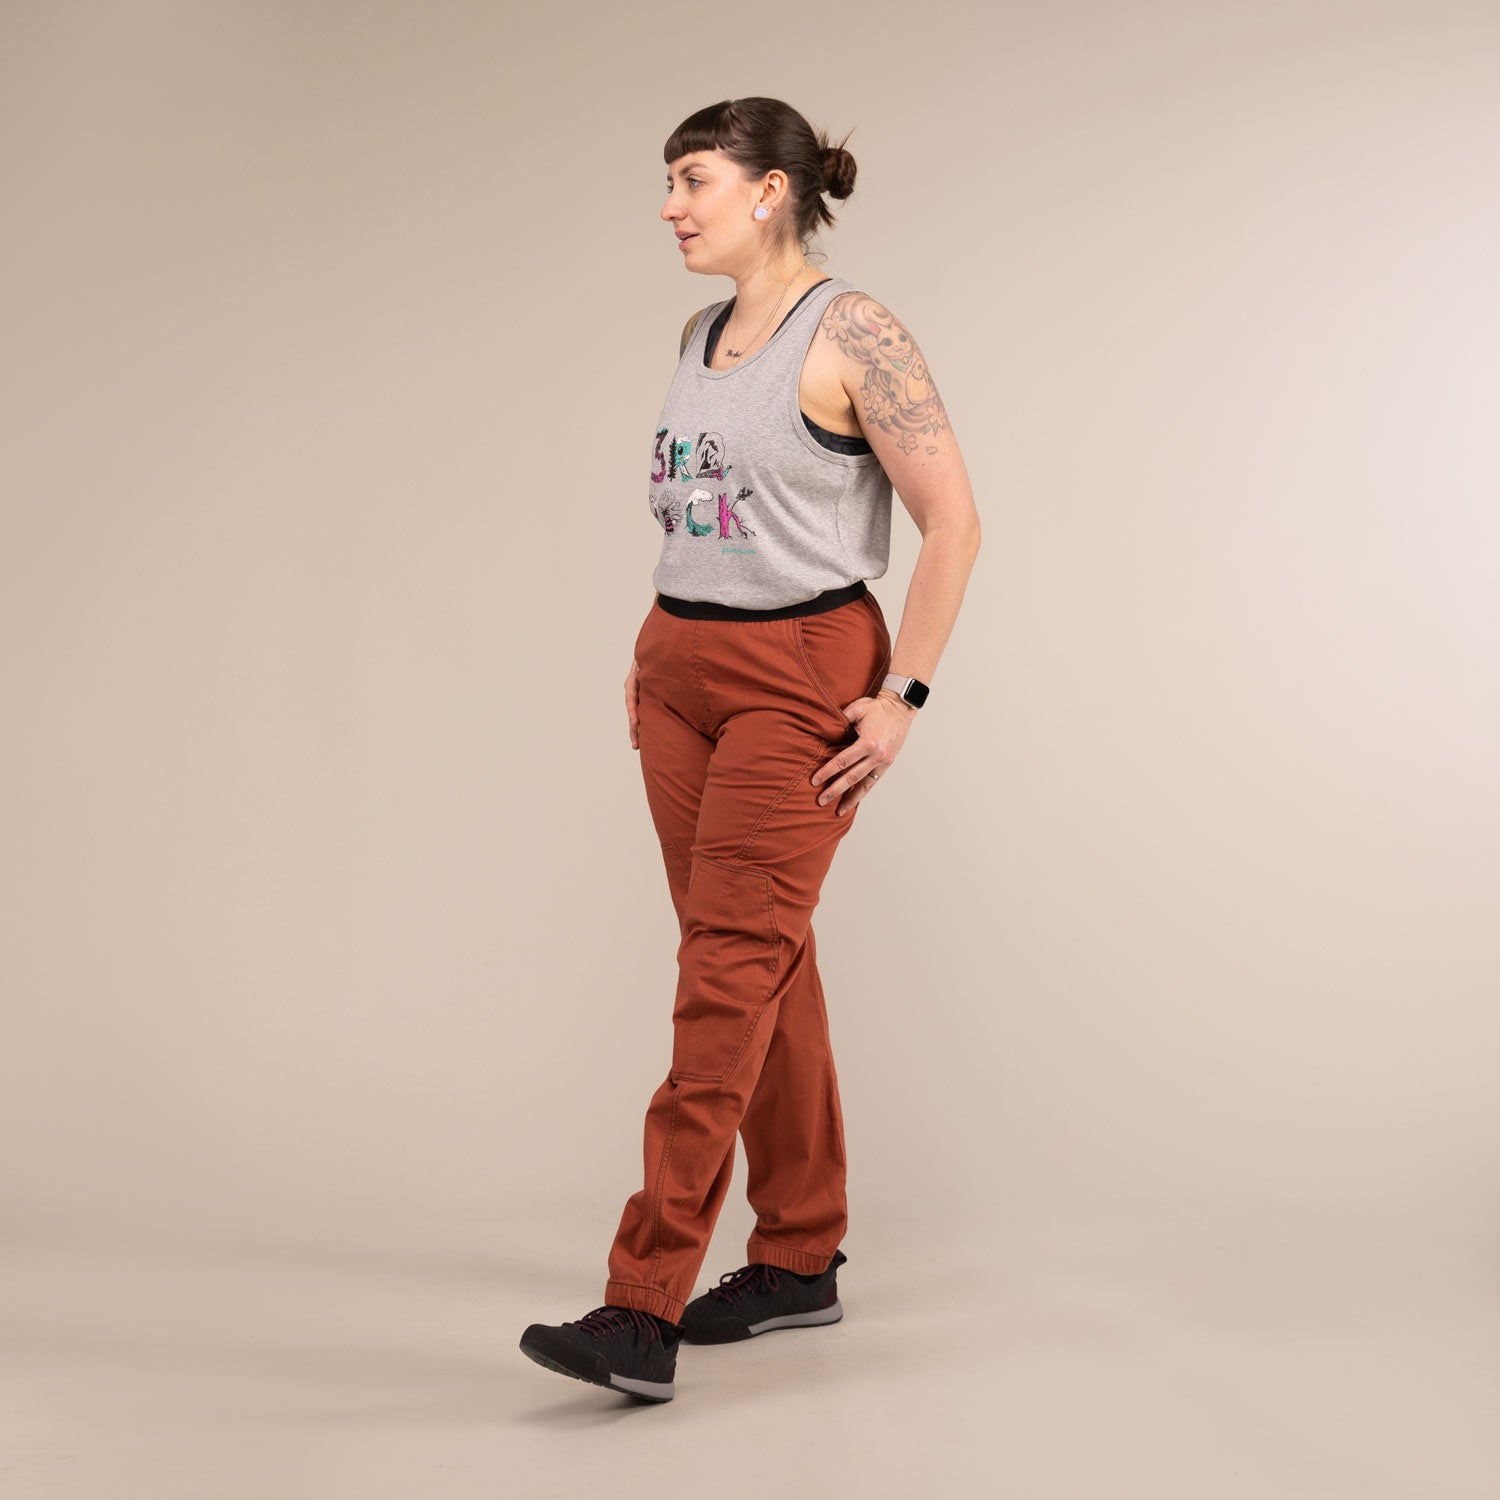 SUPERNOVA TROUSERS | Climbing Organic Stretch Trousers | 3RD ROCK Clothing -  Laura is 5ft 6 with a 31" waist, 43" hips and wears a size 32/RL. F